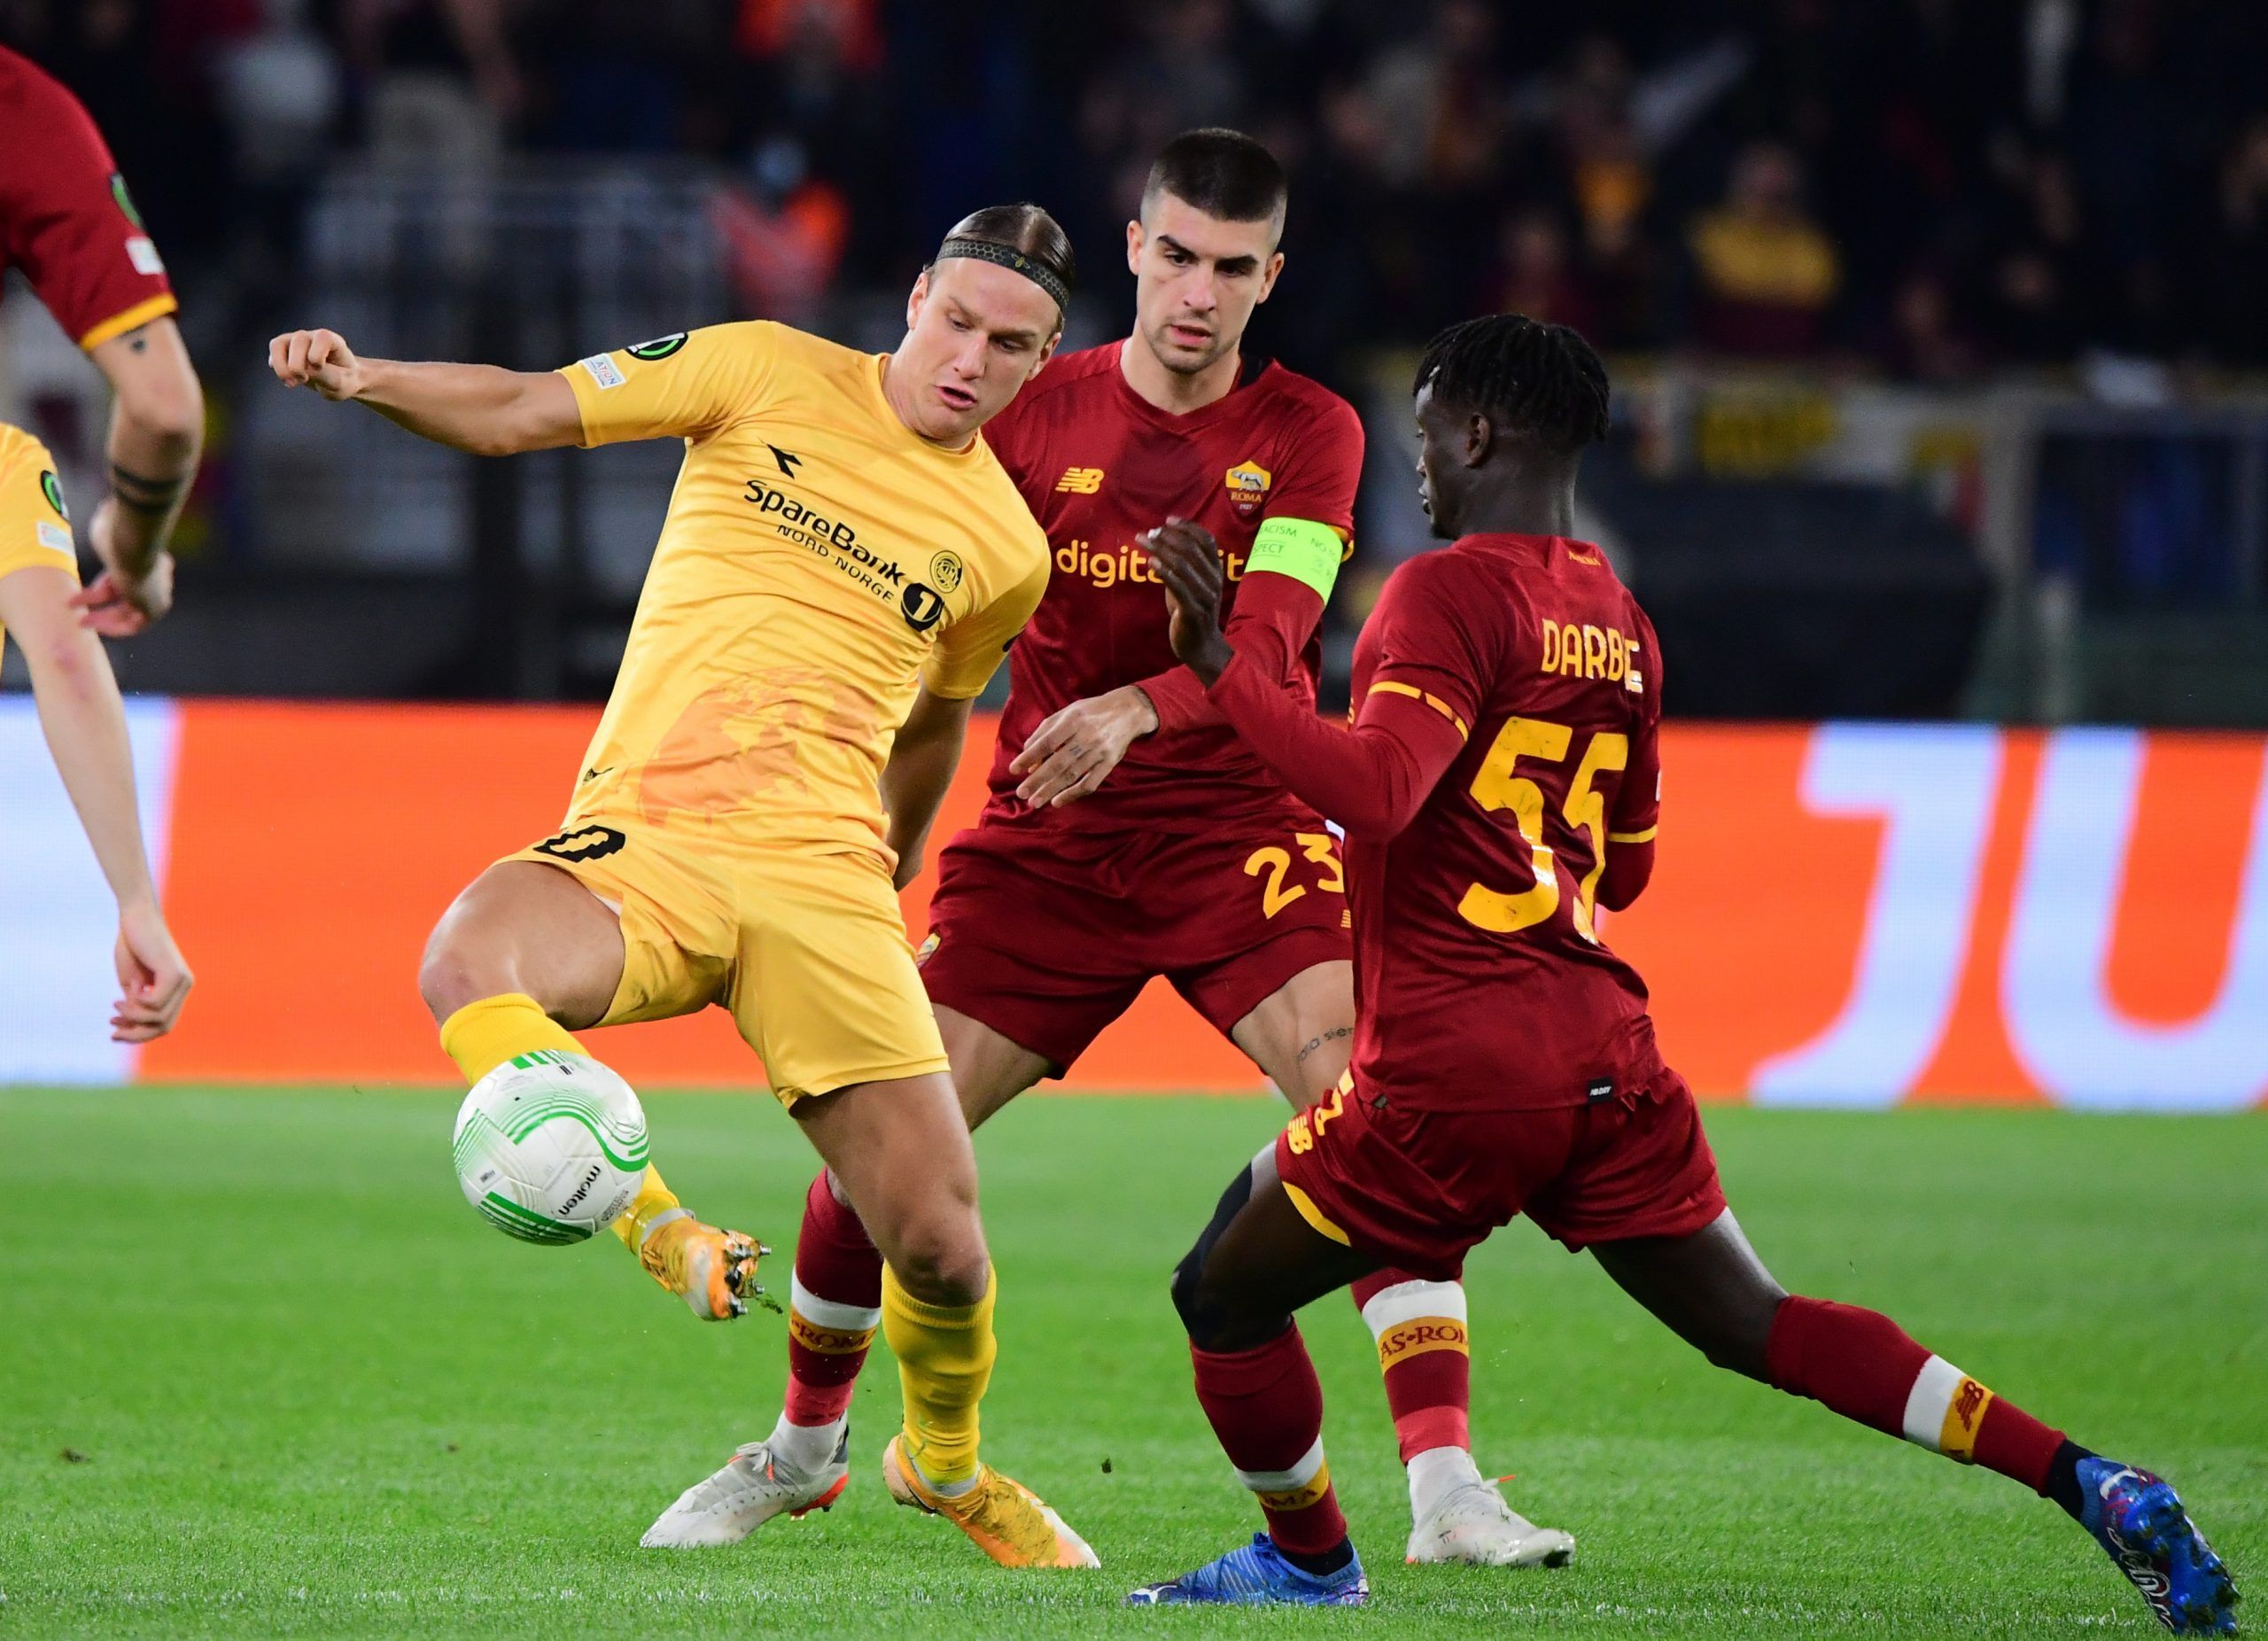 Soccer Football - Europa Conference League - Group C - AS Roma v Bodo/Glimt - Stadio Olimpico, Rome, Italy - November 4, 2021  Bodo/Glimt's Erik Botheim in action with AS Roma's Gianluca Mancini and Ebrima Darboe REUTERS/Alberto Lingria